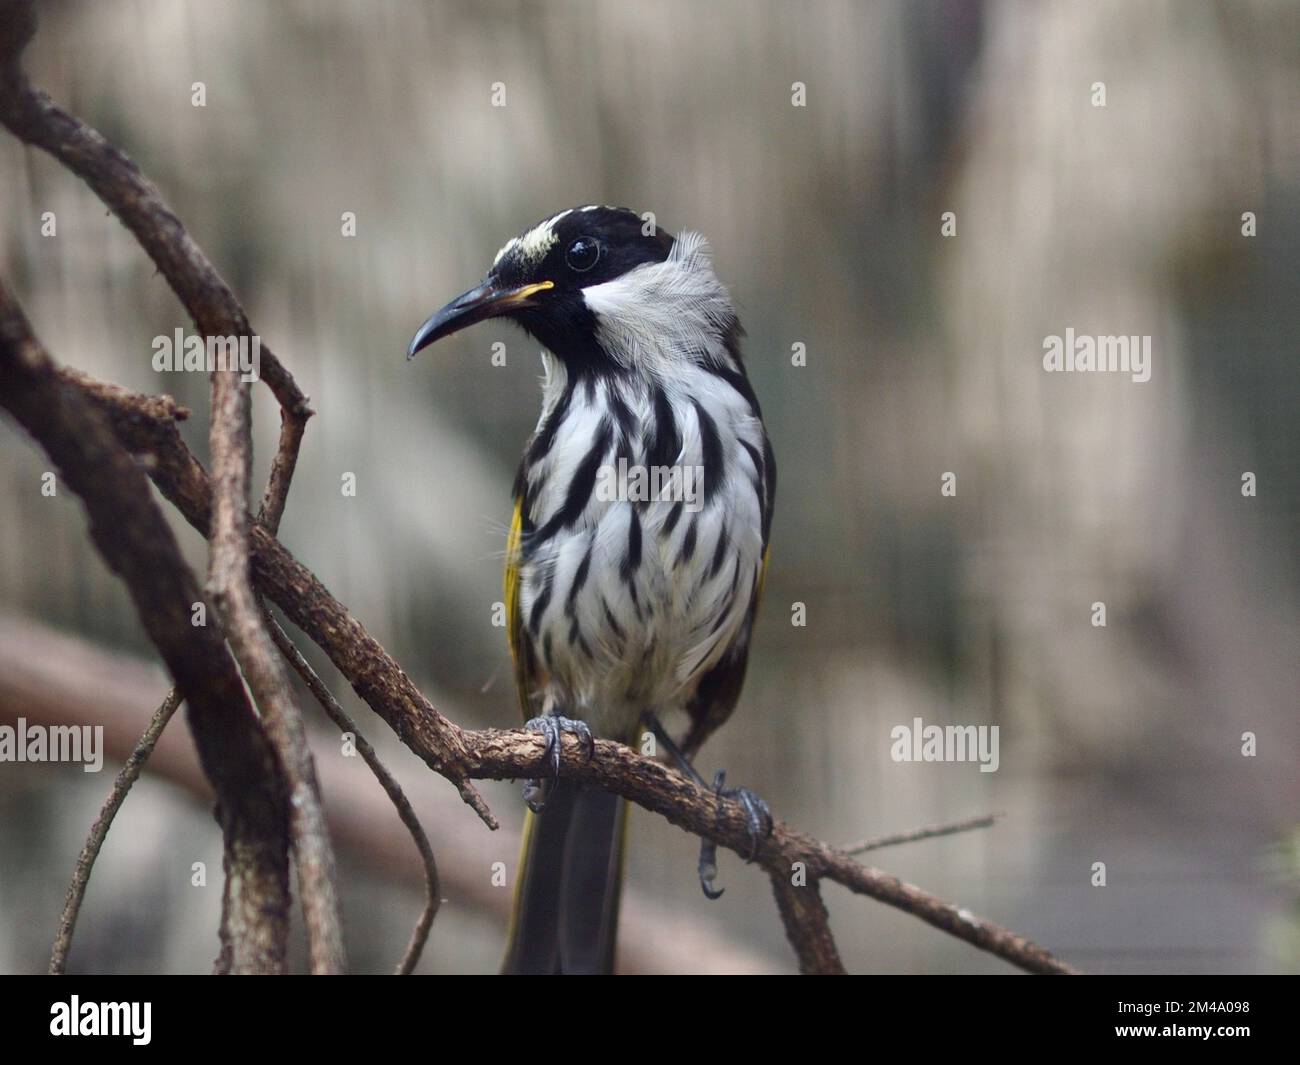 Watchful attentive White-cheeked Honeyeater with keen eyes and distinctive plumage. Stock Photo